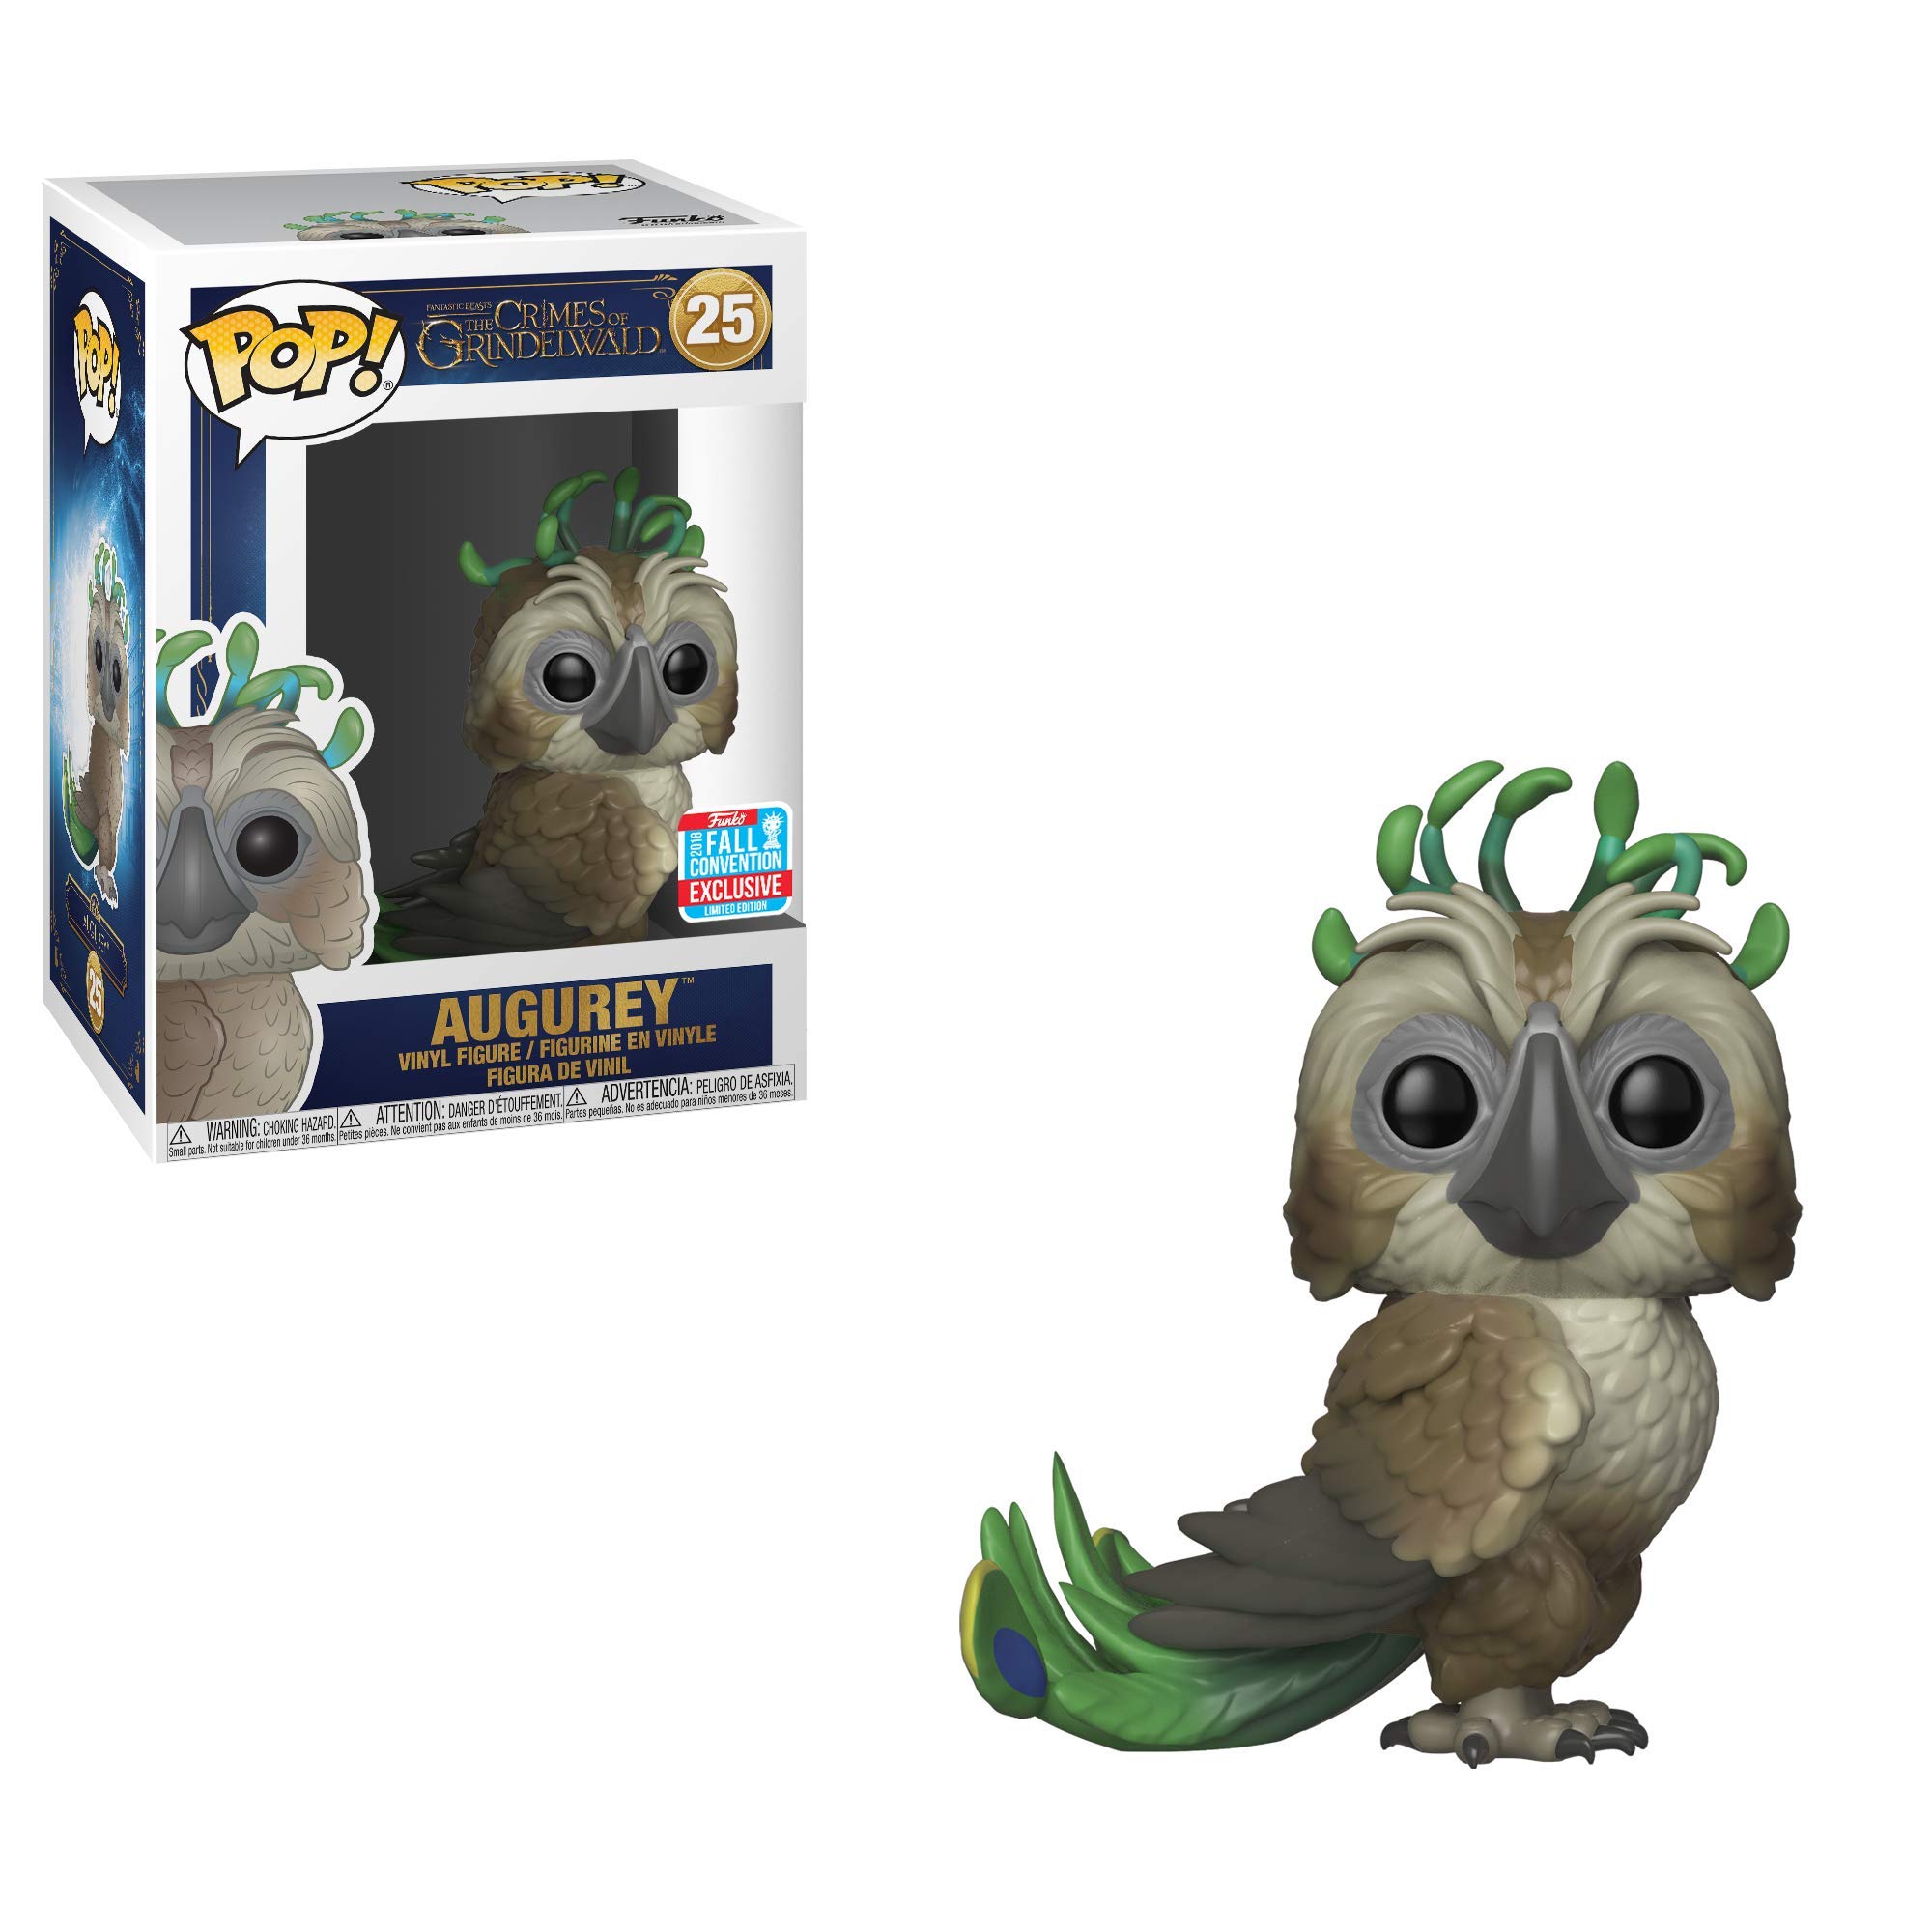 Pop! Movies: Fantastic Beasts 2 - Augurey, Fall Convention Exclusive